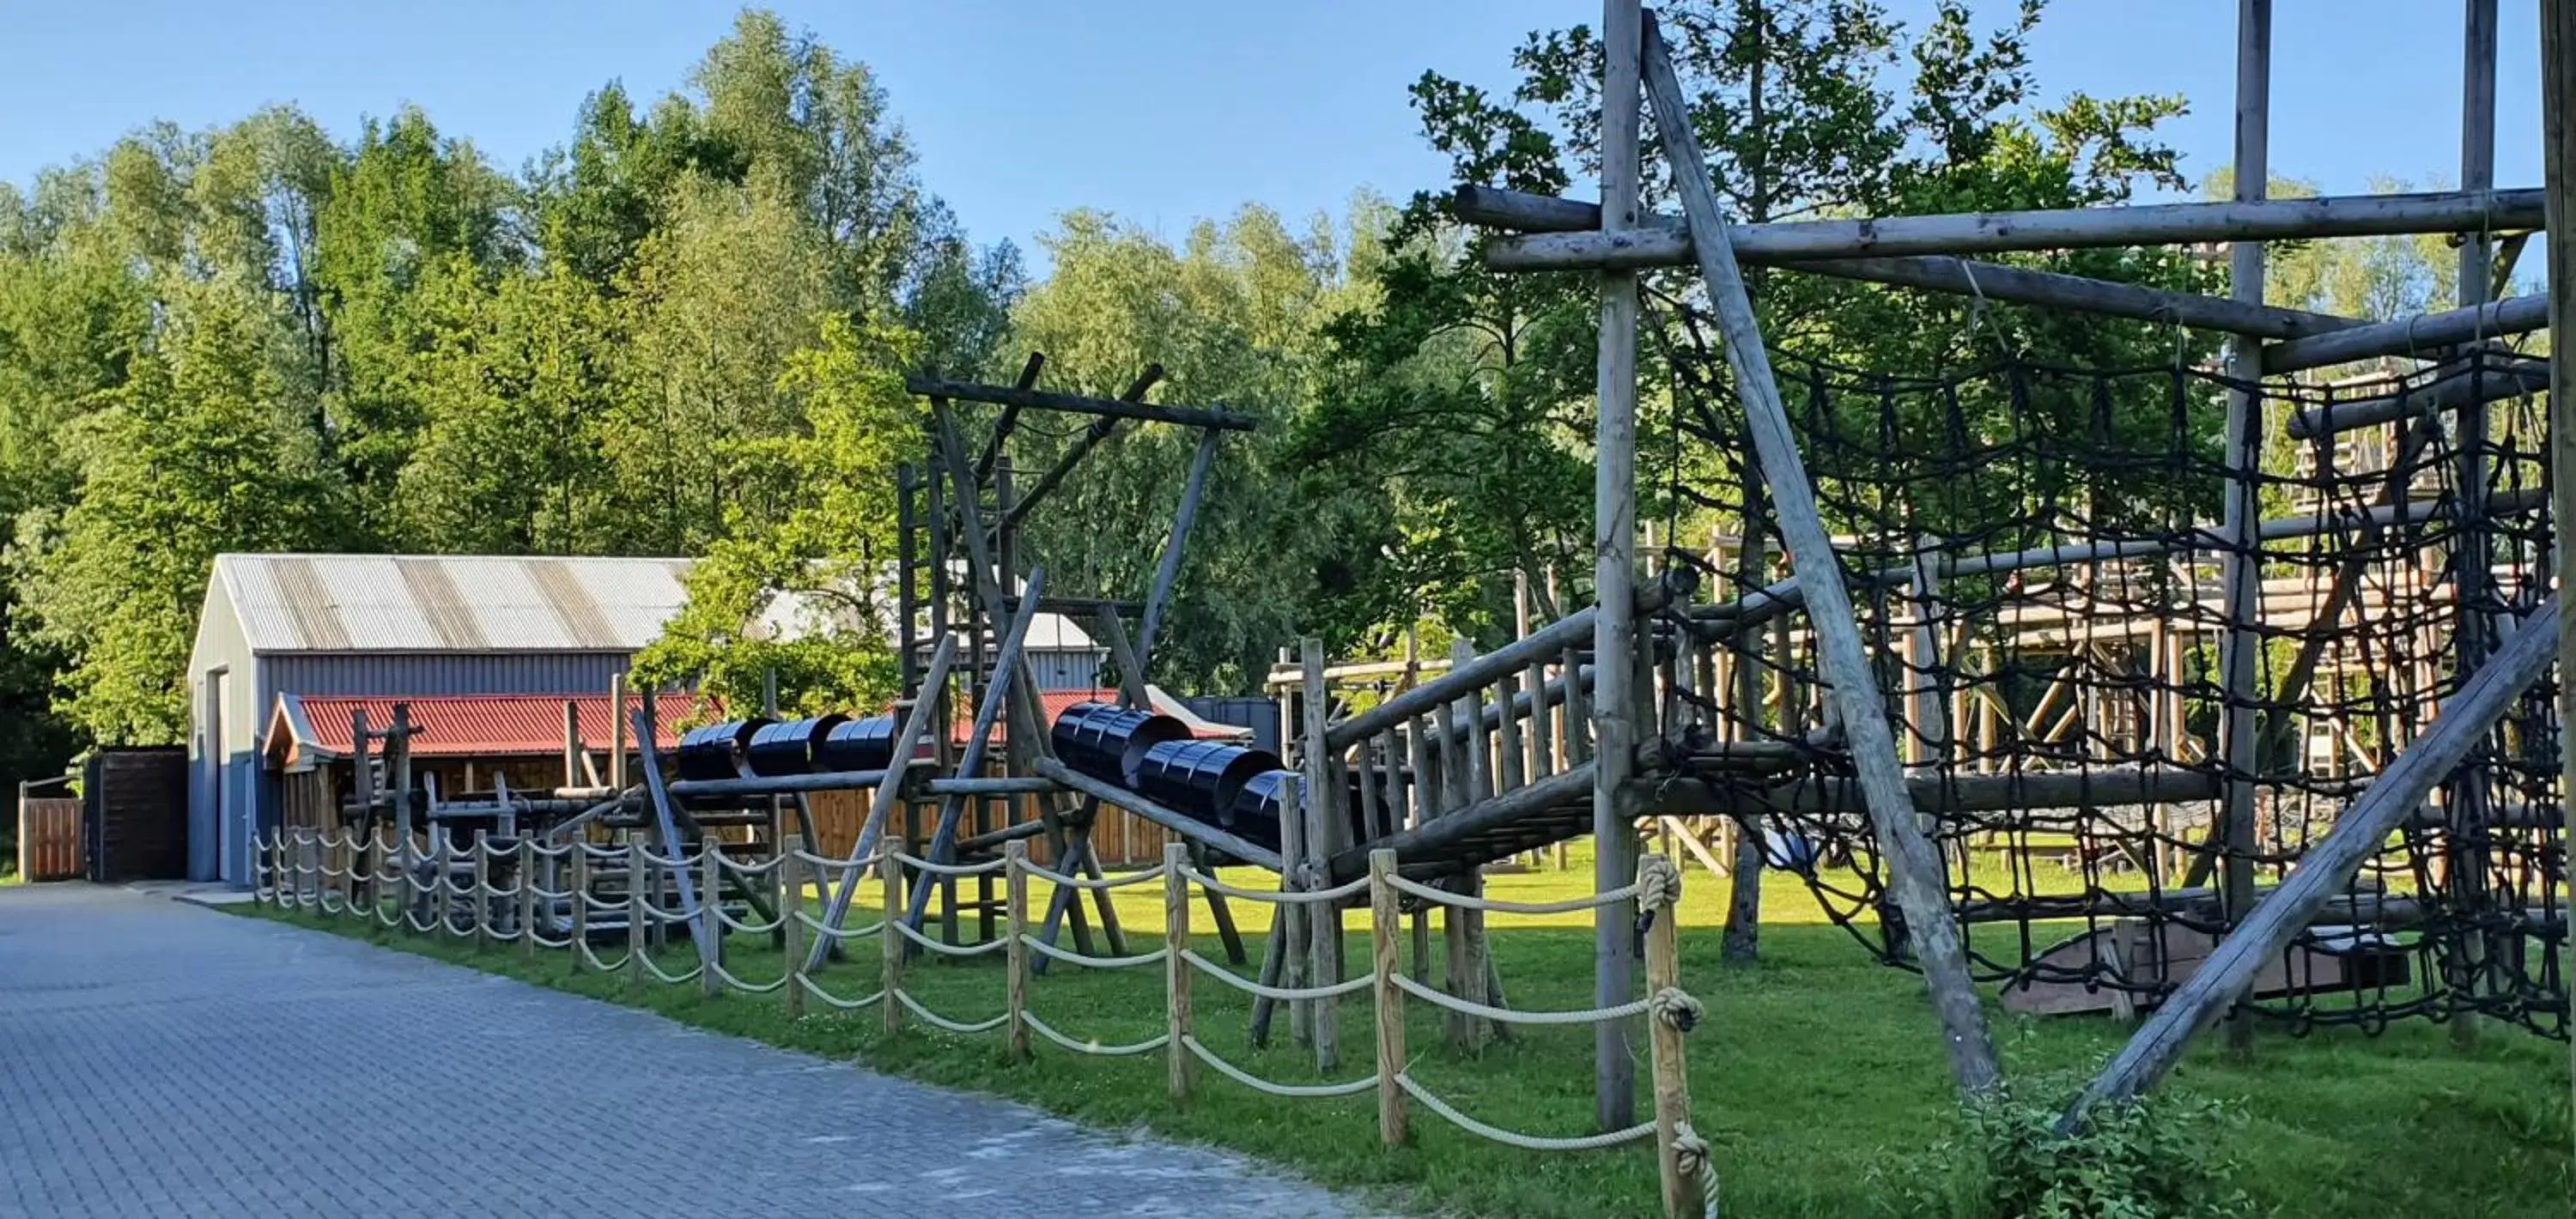 Children's Play Area in Sweetlake